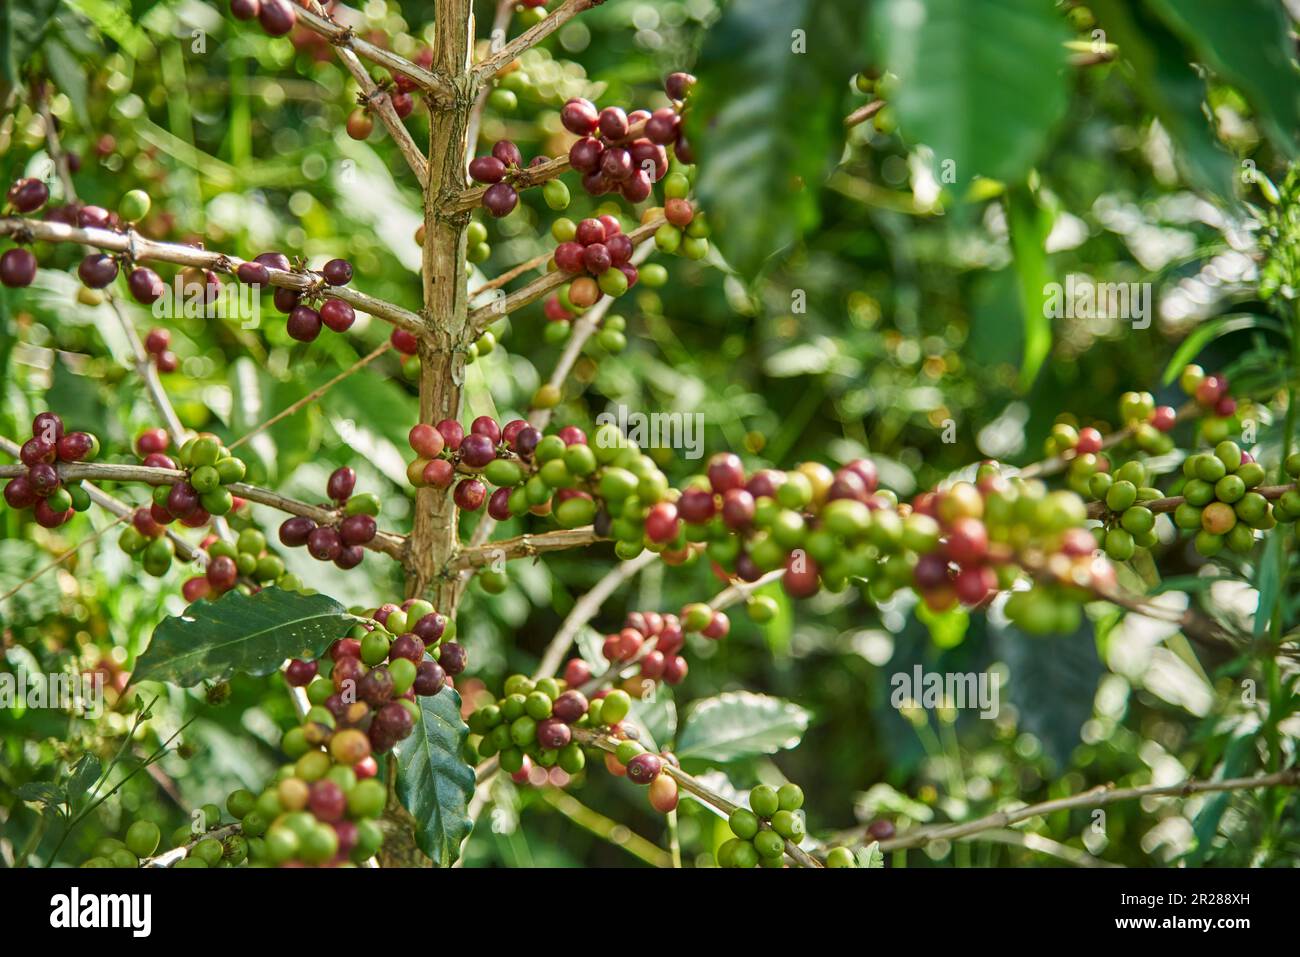 Coffee tree with many coffee beans, ripe and unripe, in its branches, in Santander, Colombia. Colombian traditional production. Stock Photo